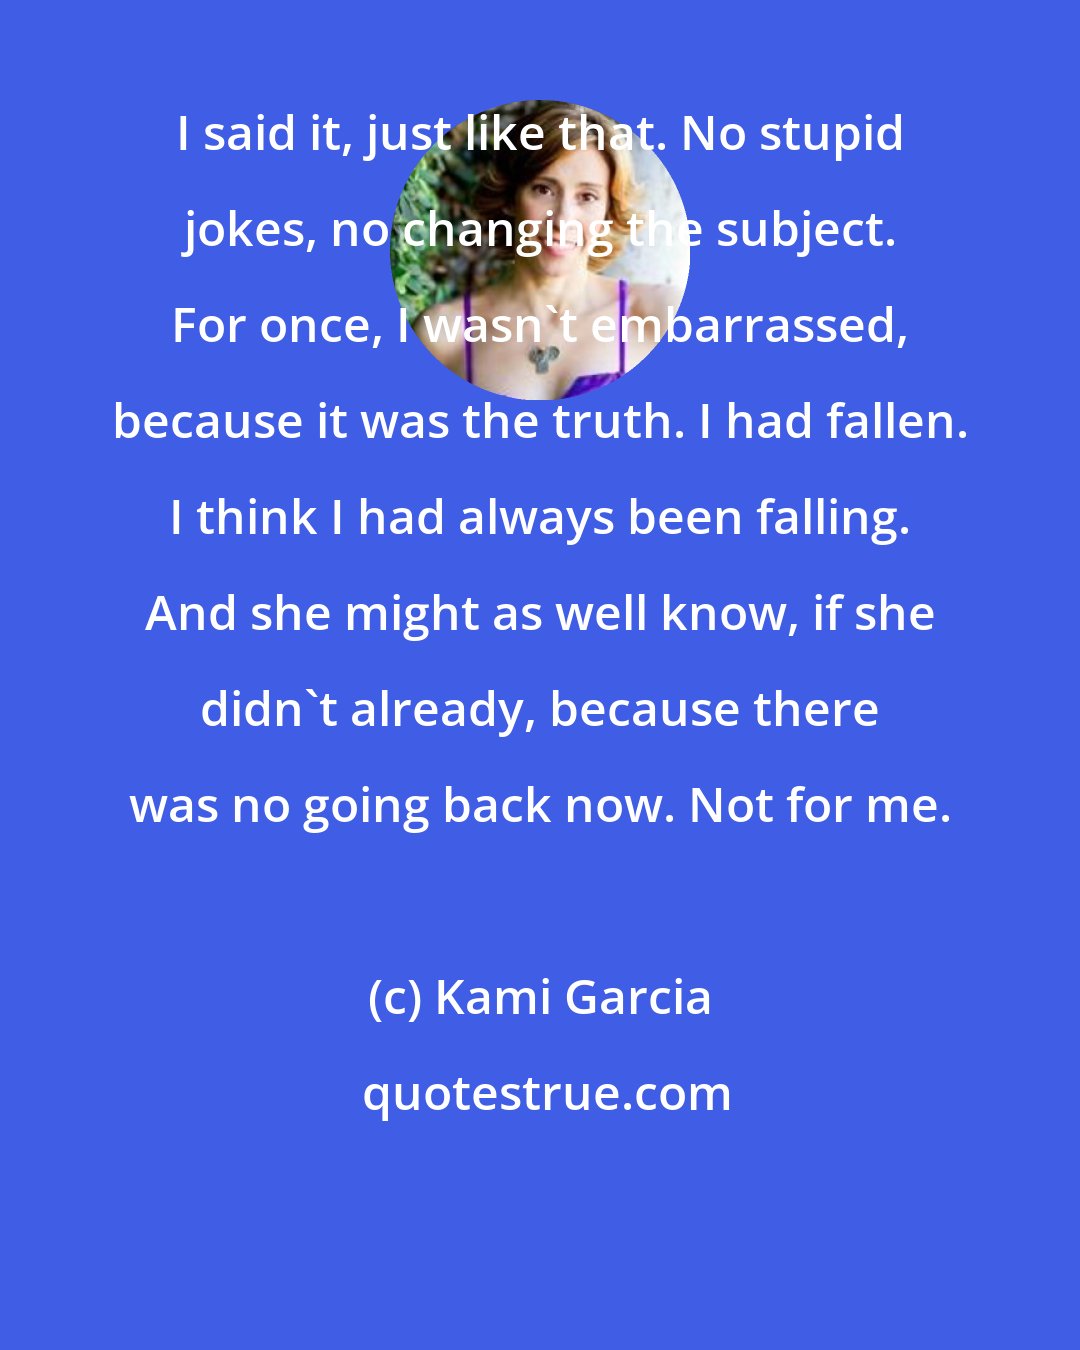 Kami Garcia: I said it, just like that. No stupid jokes, no changing the subject. For once, I wasn't embarrassed, because it was the truth. I had fallen. I think I had always been falling. And she might as well know, if she didn't already, because there was no going back now. Not for me.